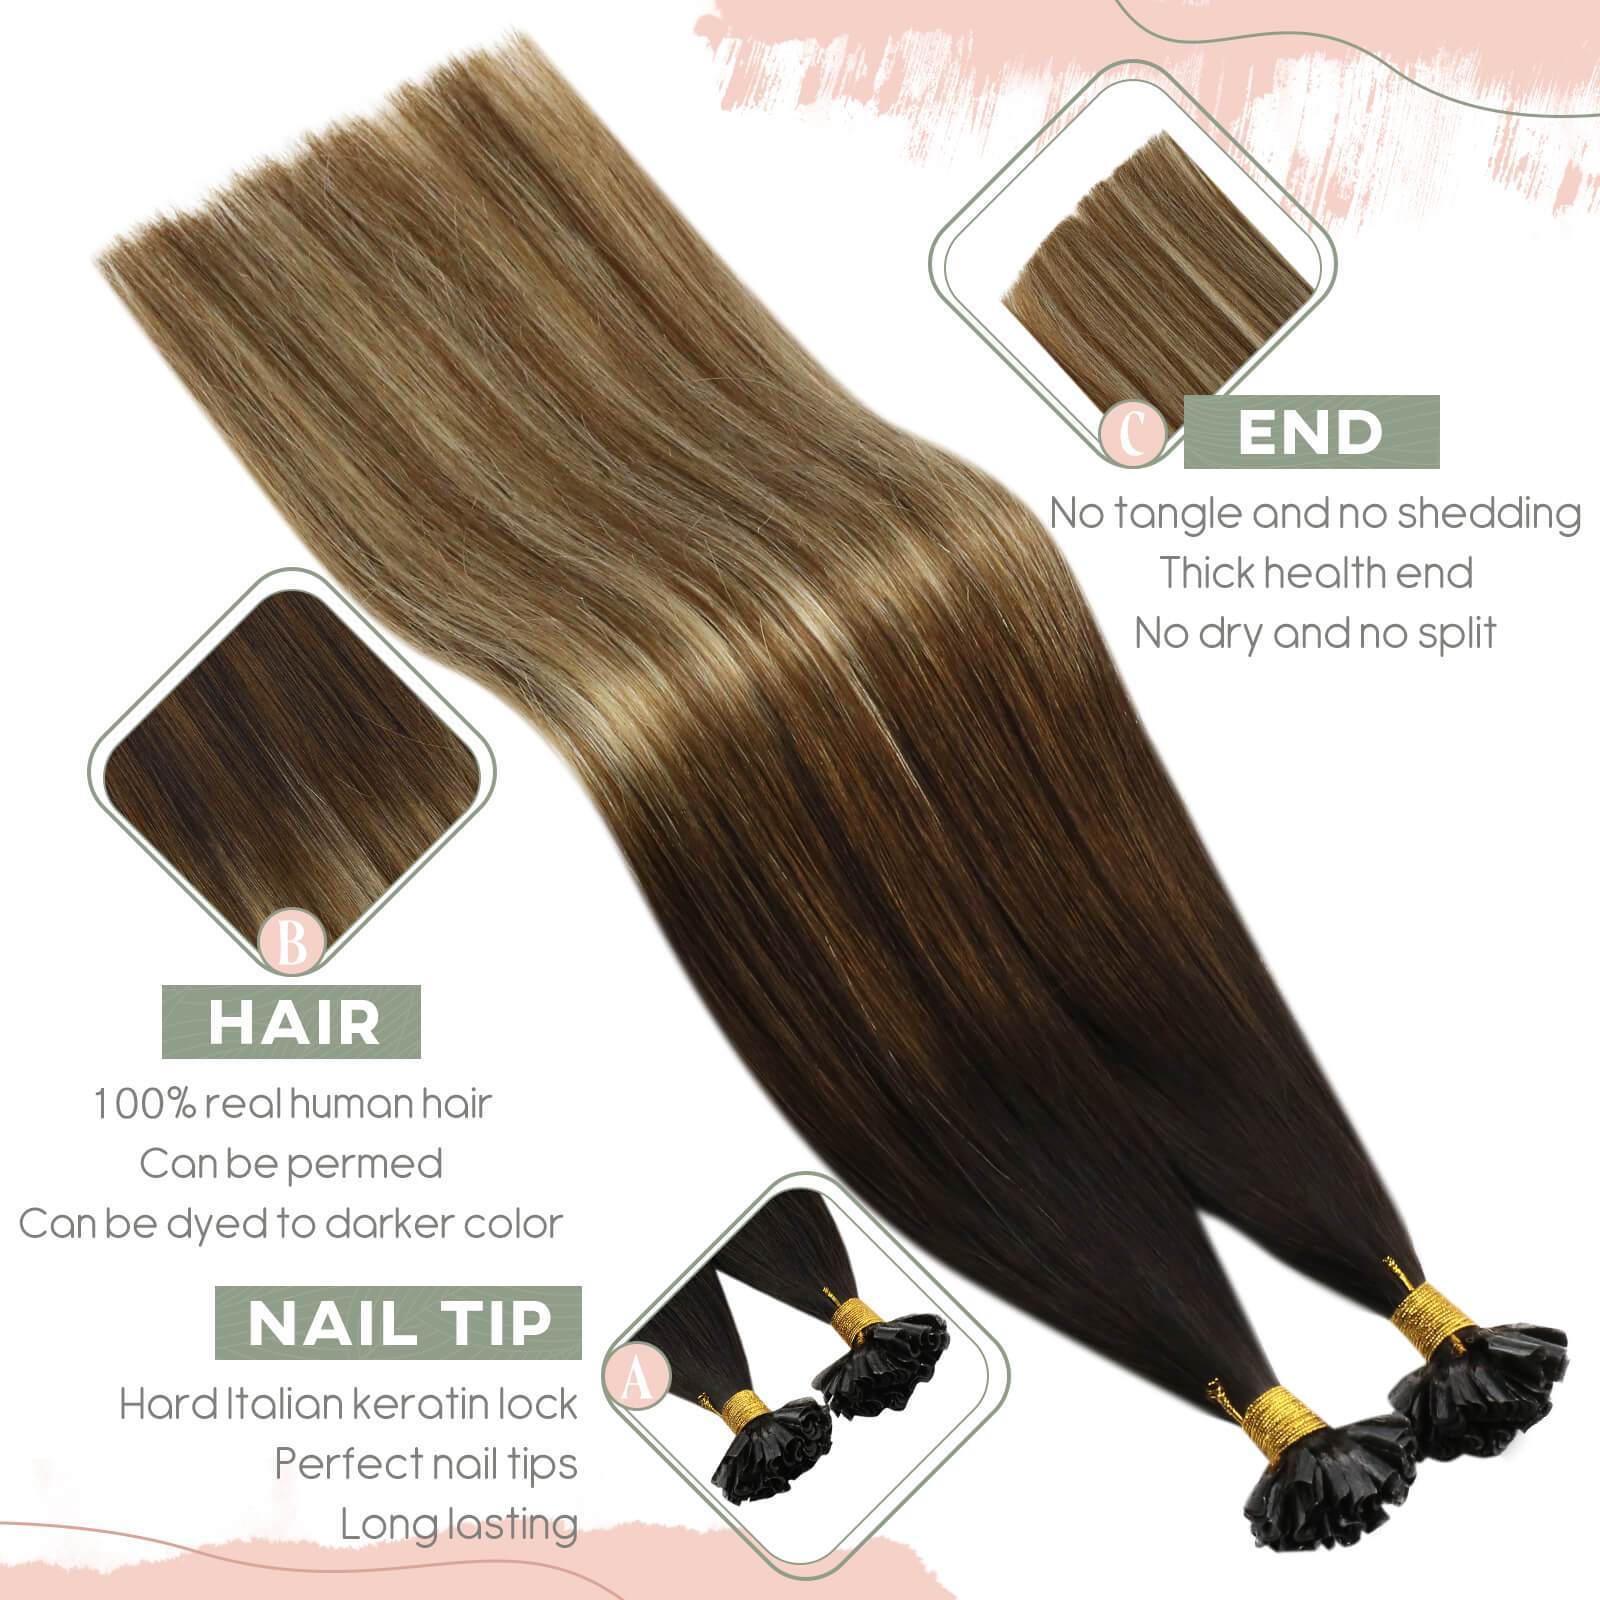 U Tip Hair Extensions Balayage Human Hair 4 Brown to 6 Brown Mixed with 613 Blonde